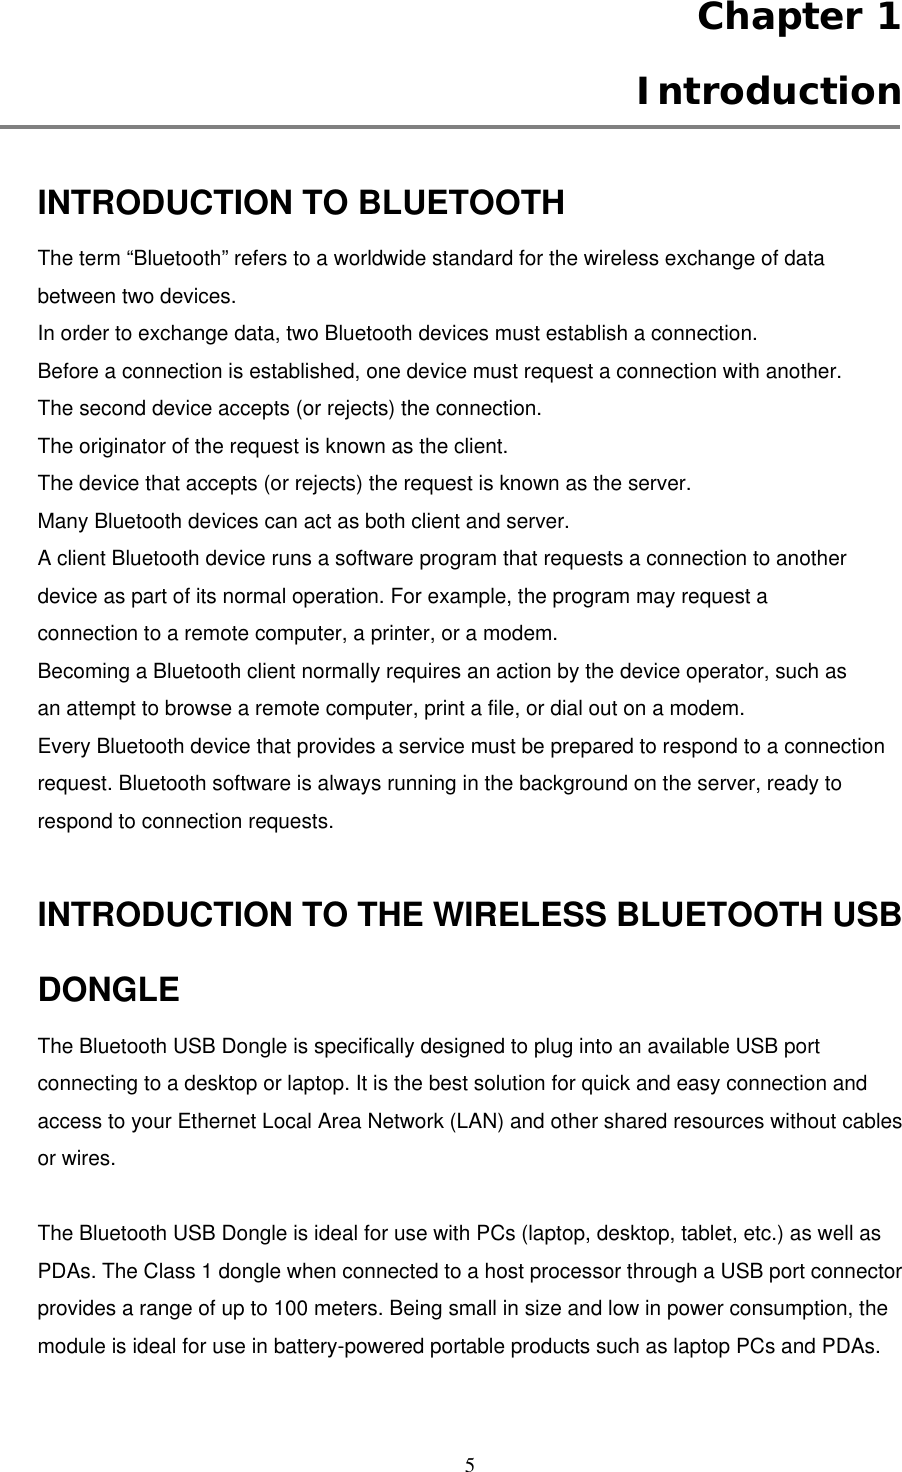  5  Chapter 1  Introduction  INTRODUCTION TO BLUETOOTH The term “Bluetooth” refers to a worldwide standard for the wireless exchange of data between two devices. In order to exchange data, two Bluetooth devices must establish a connection. Before a connection is established, one device must request a connection with another. The second device accepts (or rejects) the connection. The originator of the request is known as the client. The device that accepts (or rejects) the request is known as the server. Many Bluetooth devices can act as both client and server. A client Bluetooth device runs a software program that requests a connection to another device as part of its normal operation. For example, the program may request a connection to a remote computer, a printer, or a modem. Becoming a Bluetooth client normally requires an action by the device operator, such as an attempt to browse a remote computer, print a file, or dial out on a modem. Every Bluetooth device that provides a service must be prepared to respond to a connection request. Bluetooth software is always running in the background on the server, ready to respond to connection requests.  INTRODUCTION TO THE WIRELESS BLUETOOTH USB DONGLE The Bluetooth USB Dongle is specifically designed to plug into an available USB port connecting to a desktop or laptop. It is the best solution for quick and easy connection and access to your Ethernet Local Area Network (LAN) and other shared resources without cables or wires.    The Bluetooth USB Dongle is ideal for use with PCs (laptop, desktop, tablet, etc.) as well as PDAs. The Class 1 dongle when connected to a host processor through a USB port connector provides a range of up to 100 meters. Being small in size and low in power consumption, the module is ideal for use in battery-powered portable products such as laptop PCs and PDAs.  